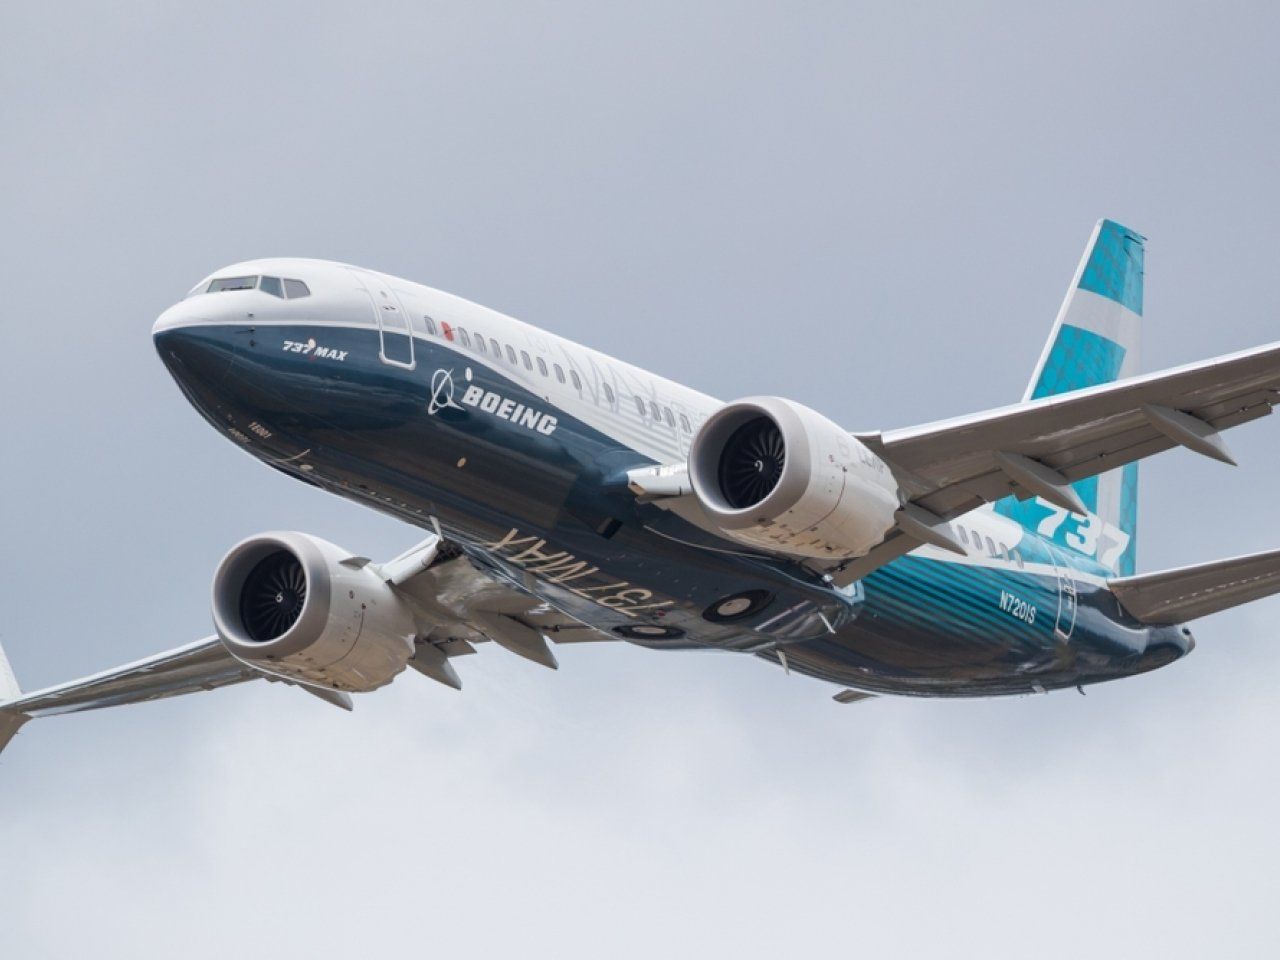 FlyersRights litigation continues after Boeing settles with MAX crash victims